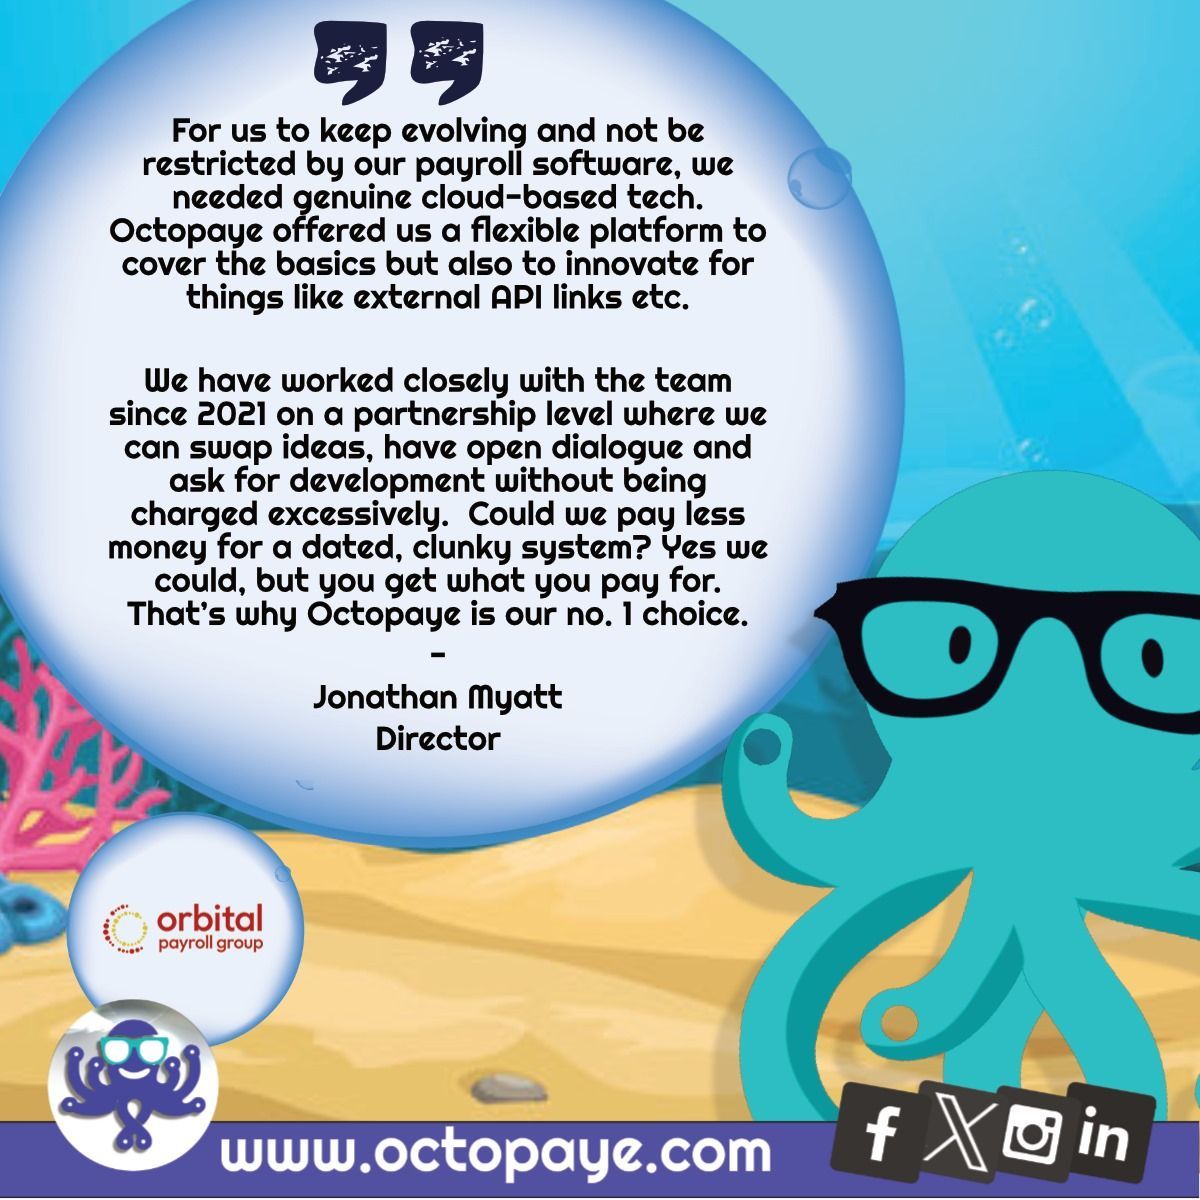 “open dialogue without being charged excessively” 👌 

📧 info@octopaye.com
☎️ 01260 765 005

#payroll #paybureau #tempstaffing #accounting #payrollservices #accountants #recruitment #outsourcing #umbrellaservice #cis #umbrellapayroll #paye #umbrellacompany